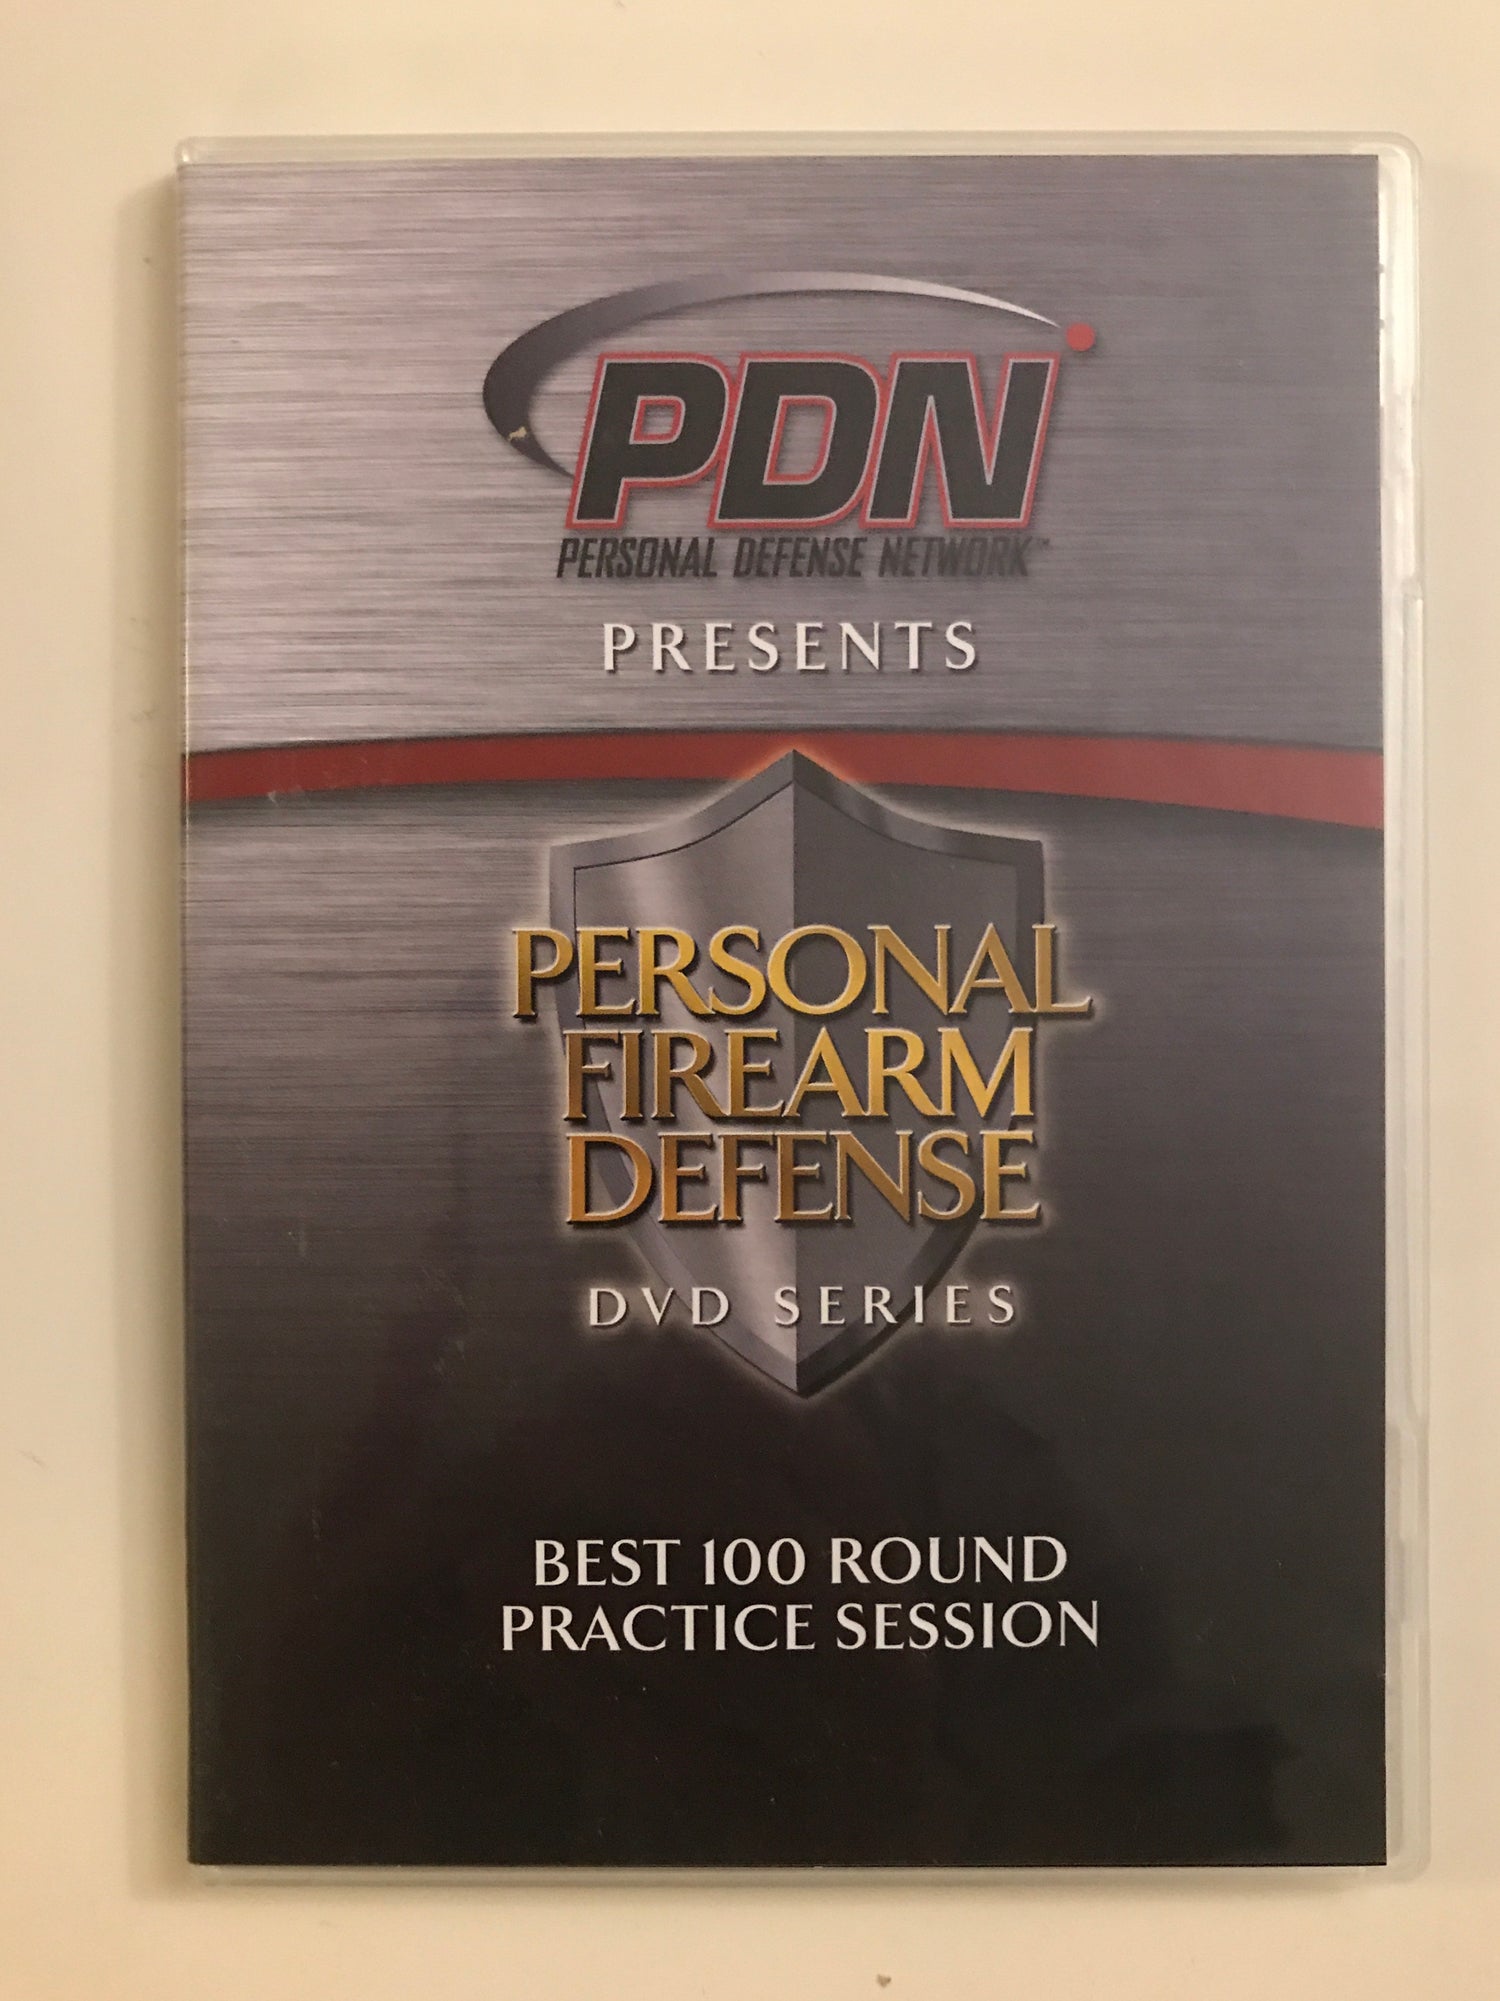 Personal Firearm Defense: Best 100 Round Practice Session DVD by Rob Pincus (Preowned) - Budovideos Inc